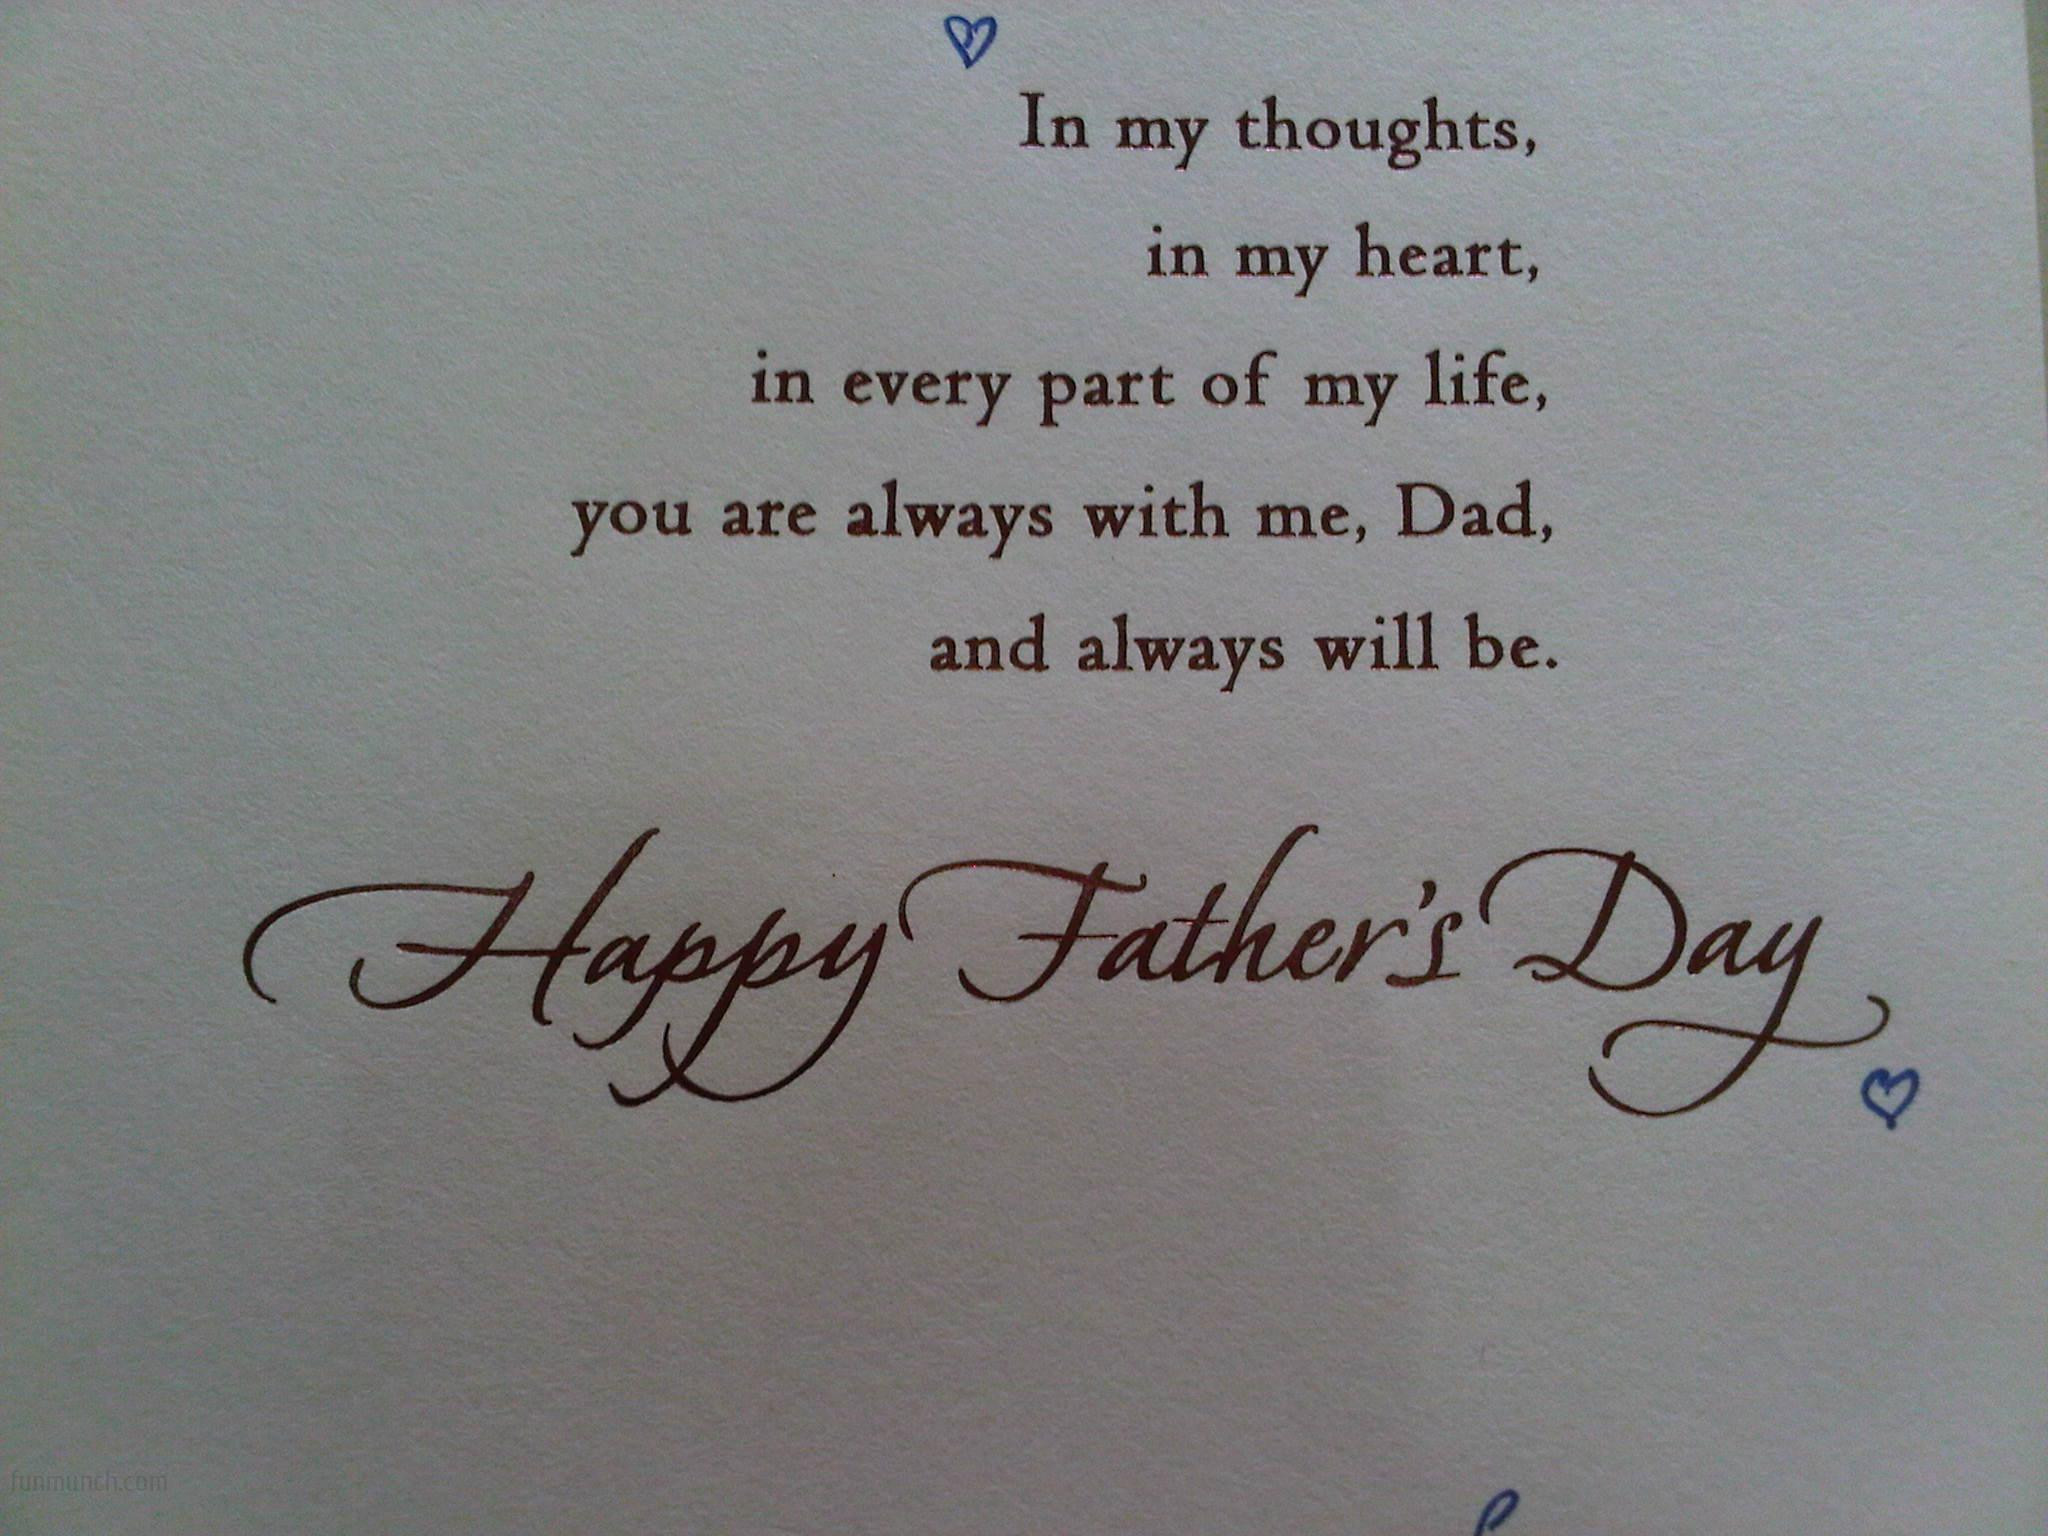 Husband Fathers Day Quotes
 For My Husband Happy Fathers Day Quotes In Spanish QuotesGram